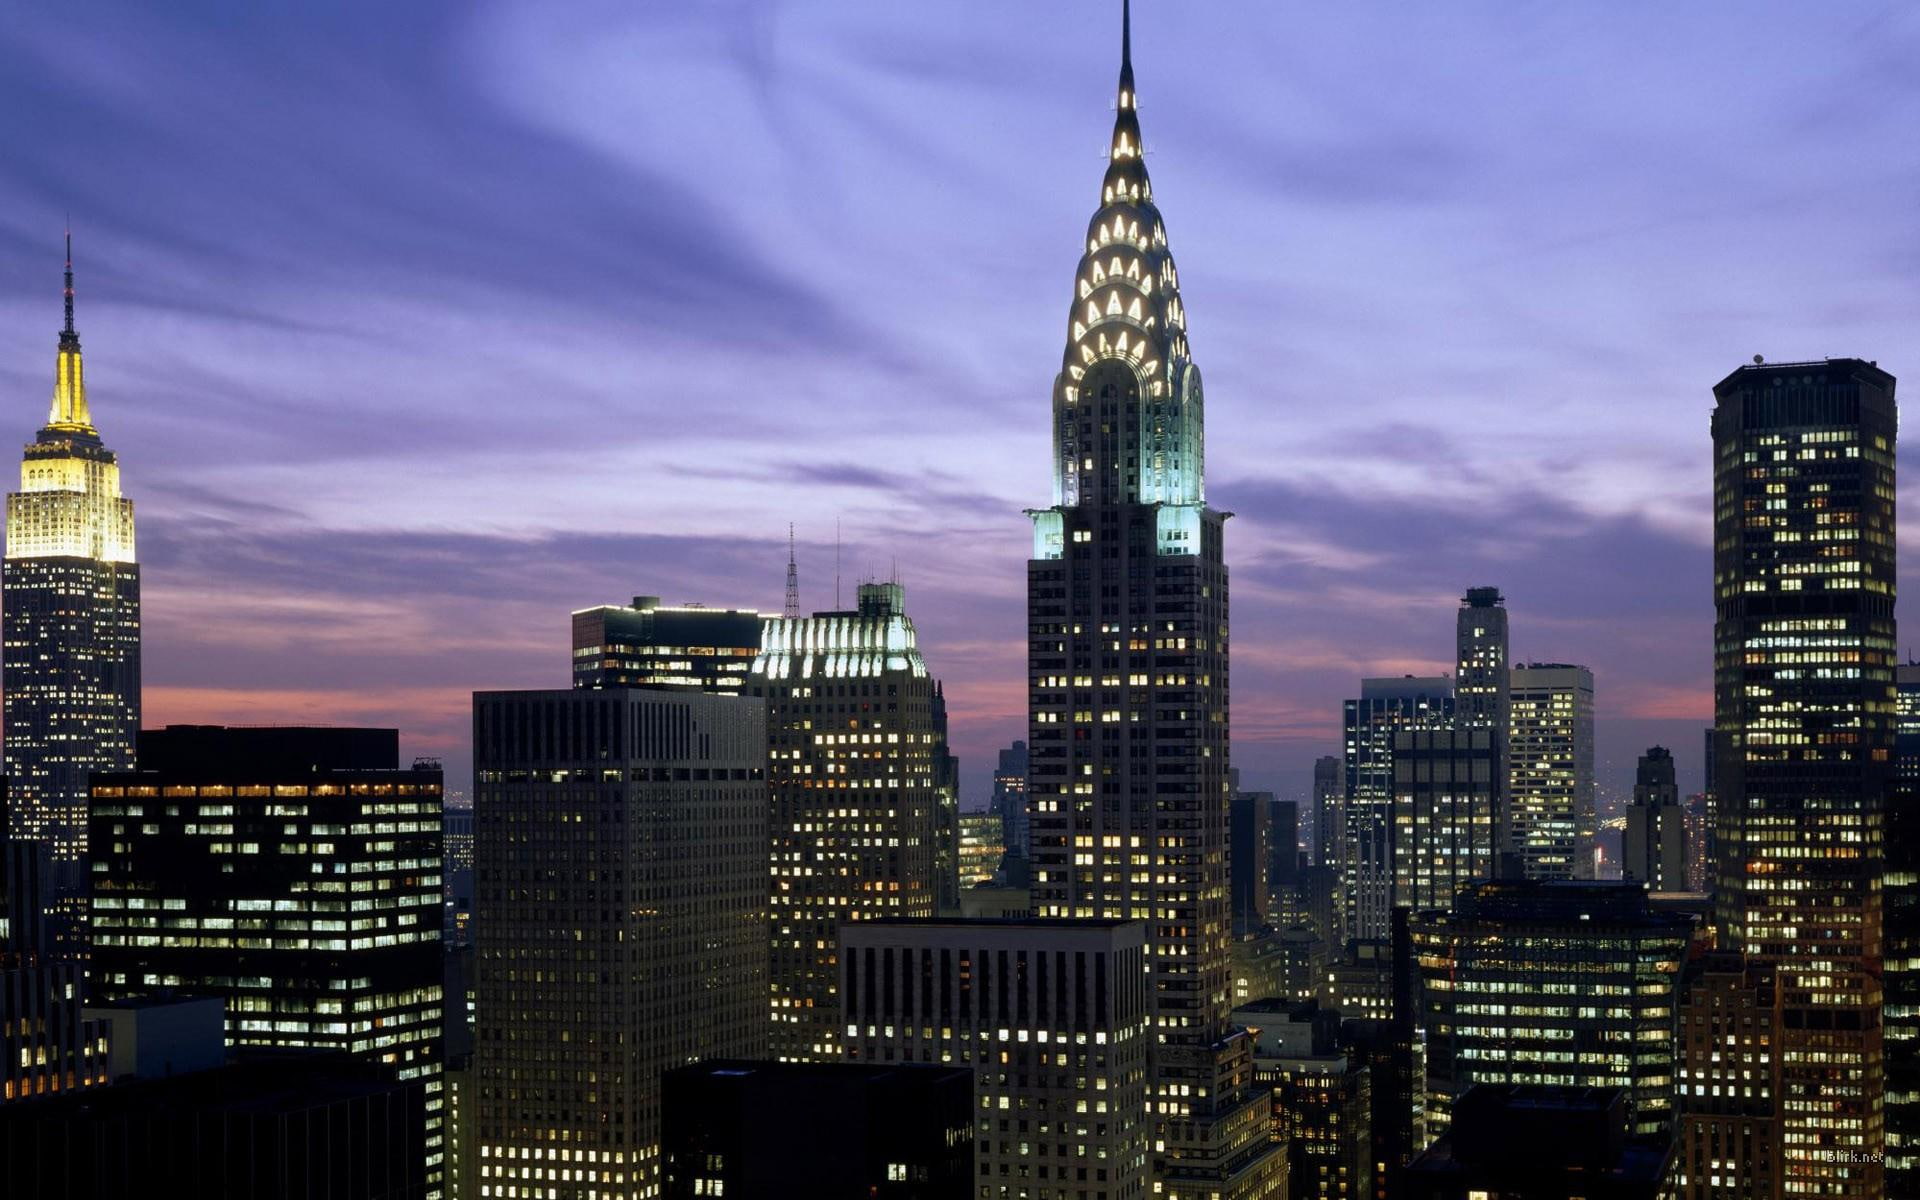 Empire State Building, New York, Usa, chrysler tower, architecture